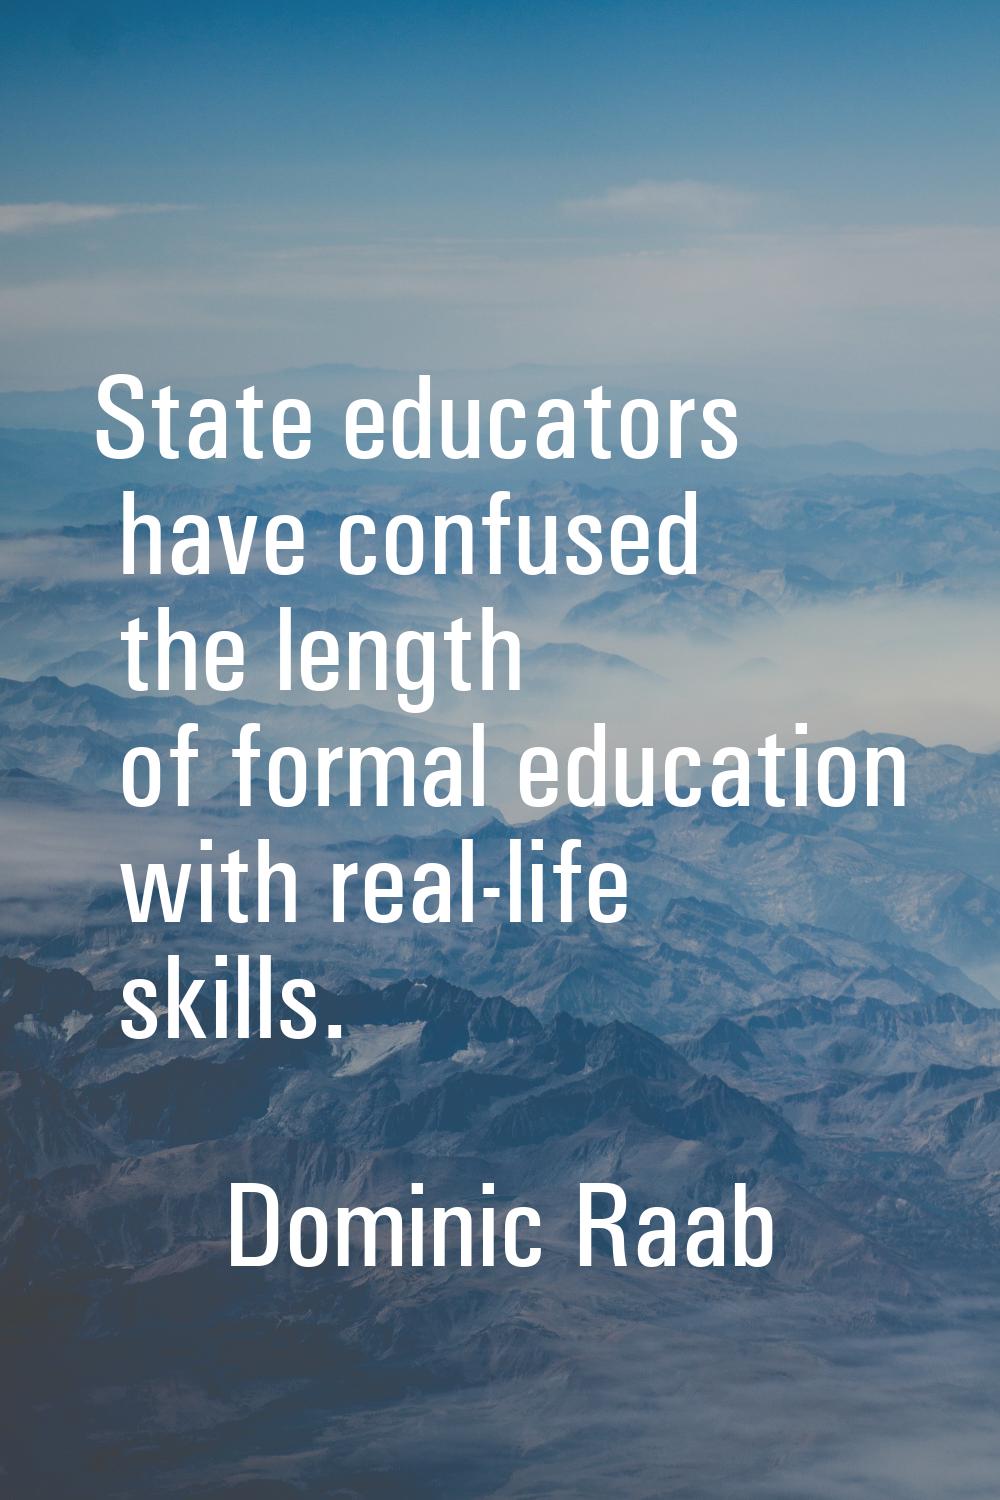 State educators have confused the length of formal education with real-life skills.